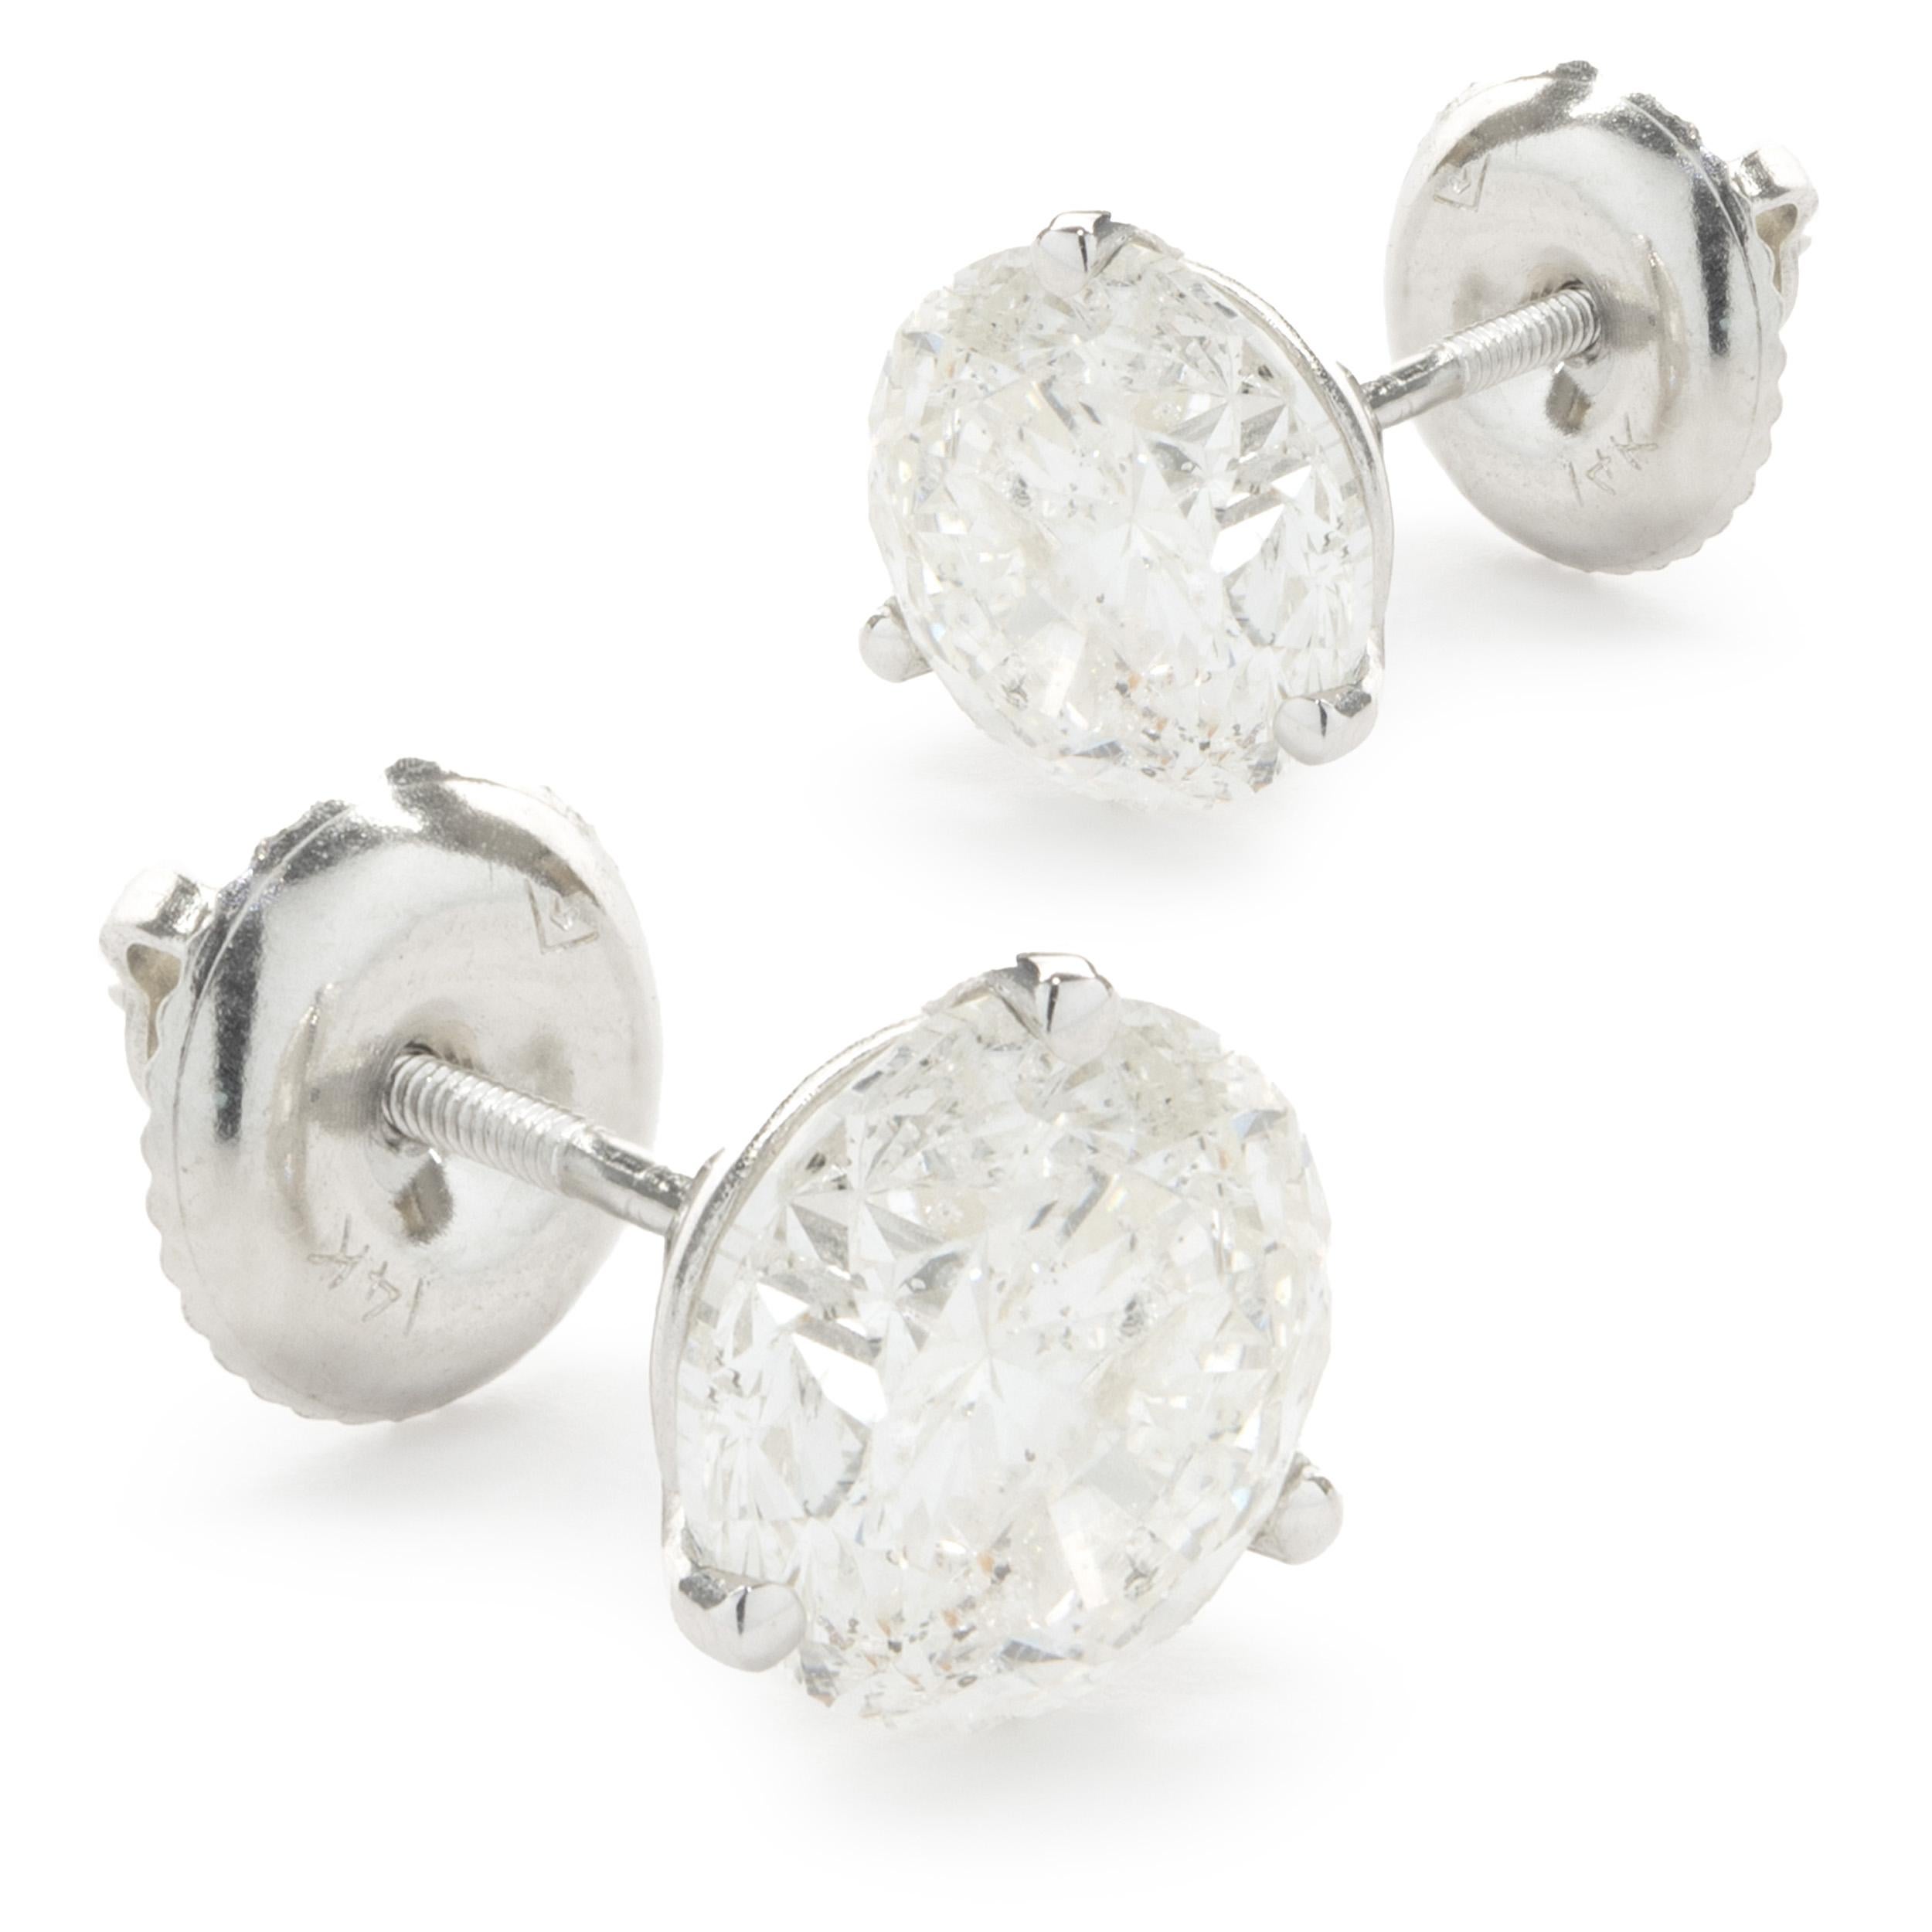 Material: 14k white gold
Diamonds: 2 round brilliant cut = 3.04cttw
Color: G / H
Clarity: I1
Dimensions: earrings measure approximately 7.19mm in diameter
Fastenings: post with screw backs
Weight: 1.47 grams